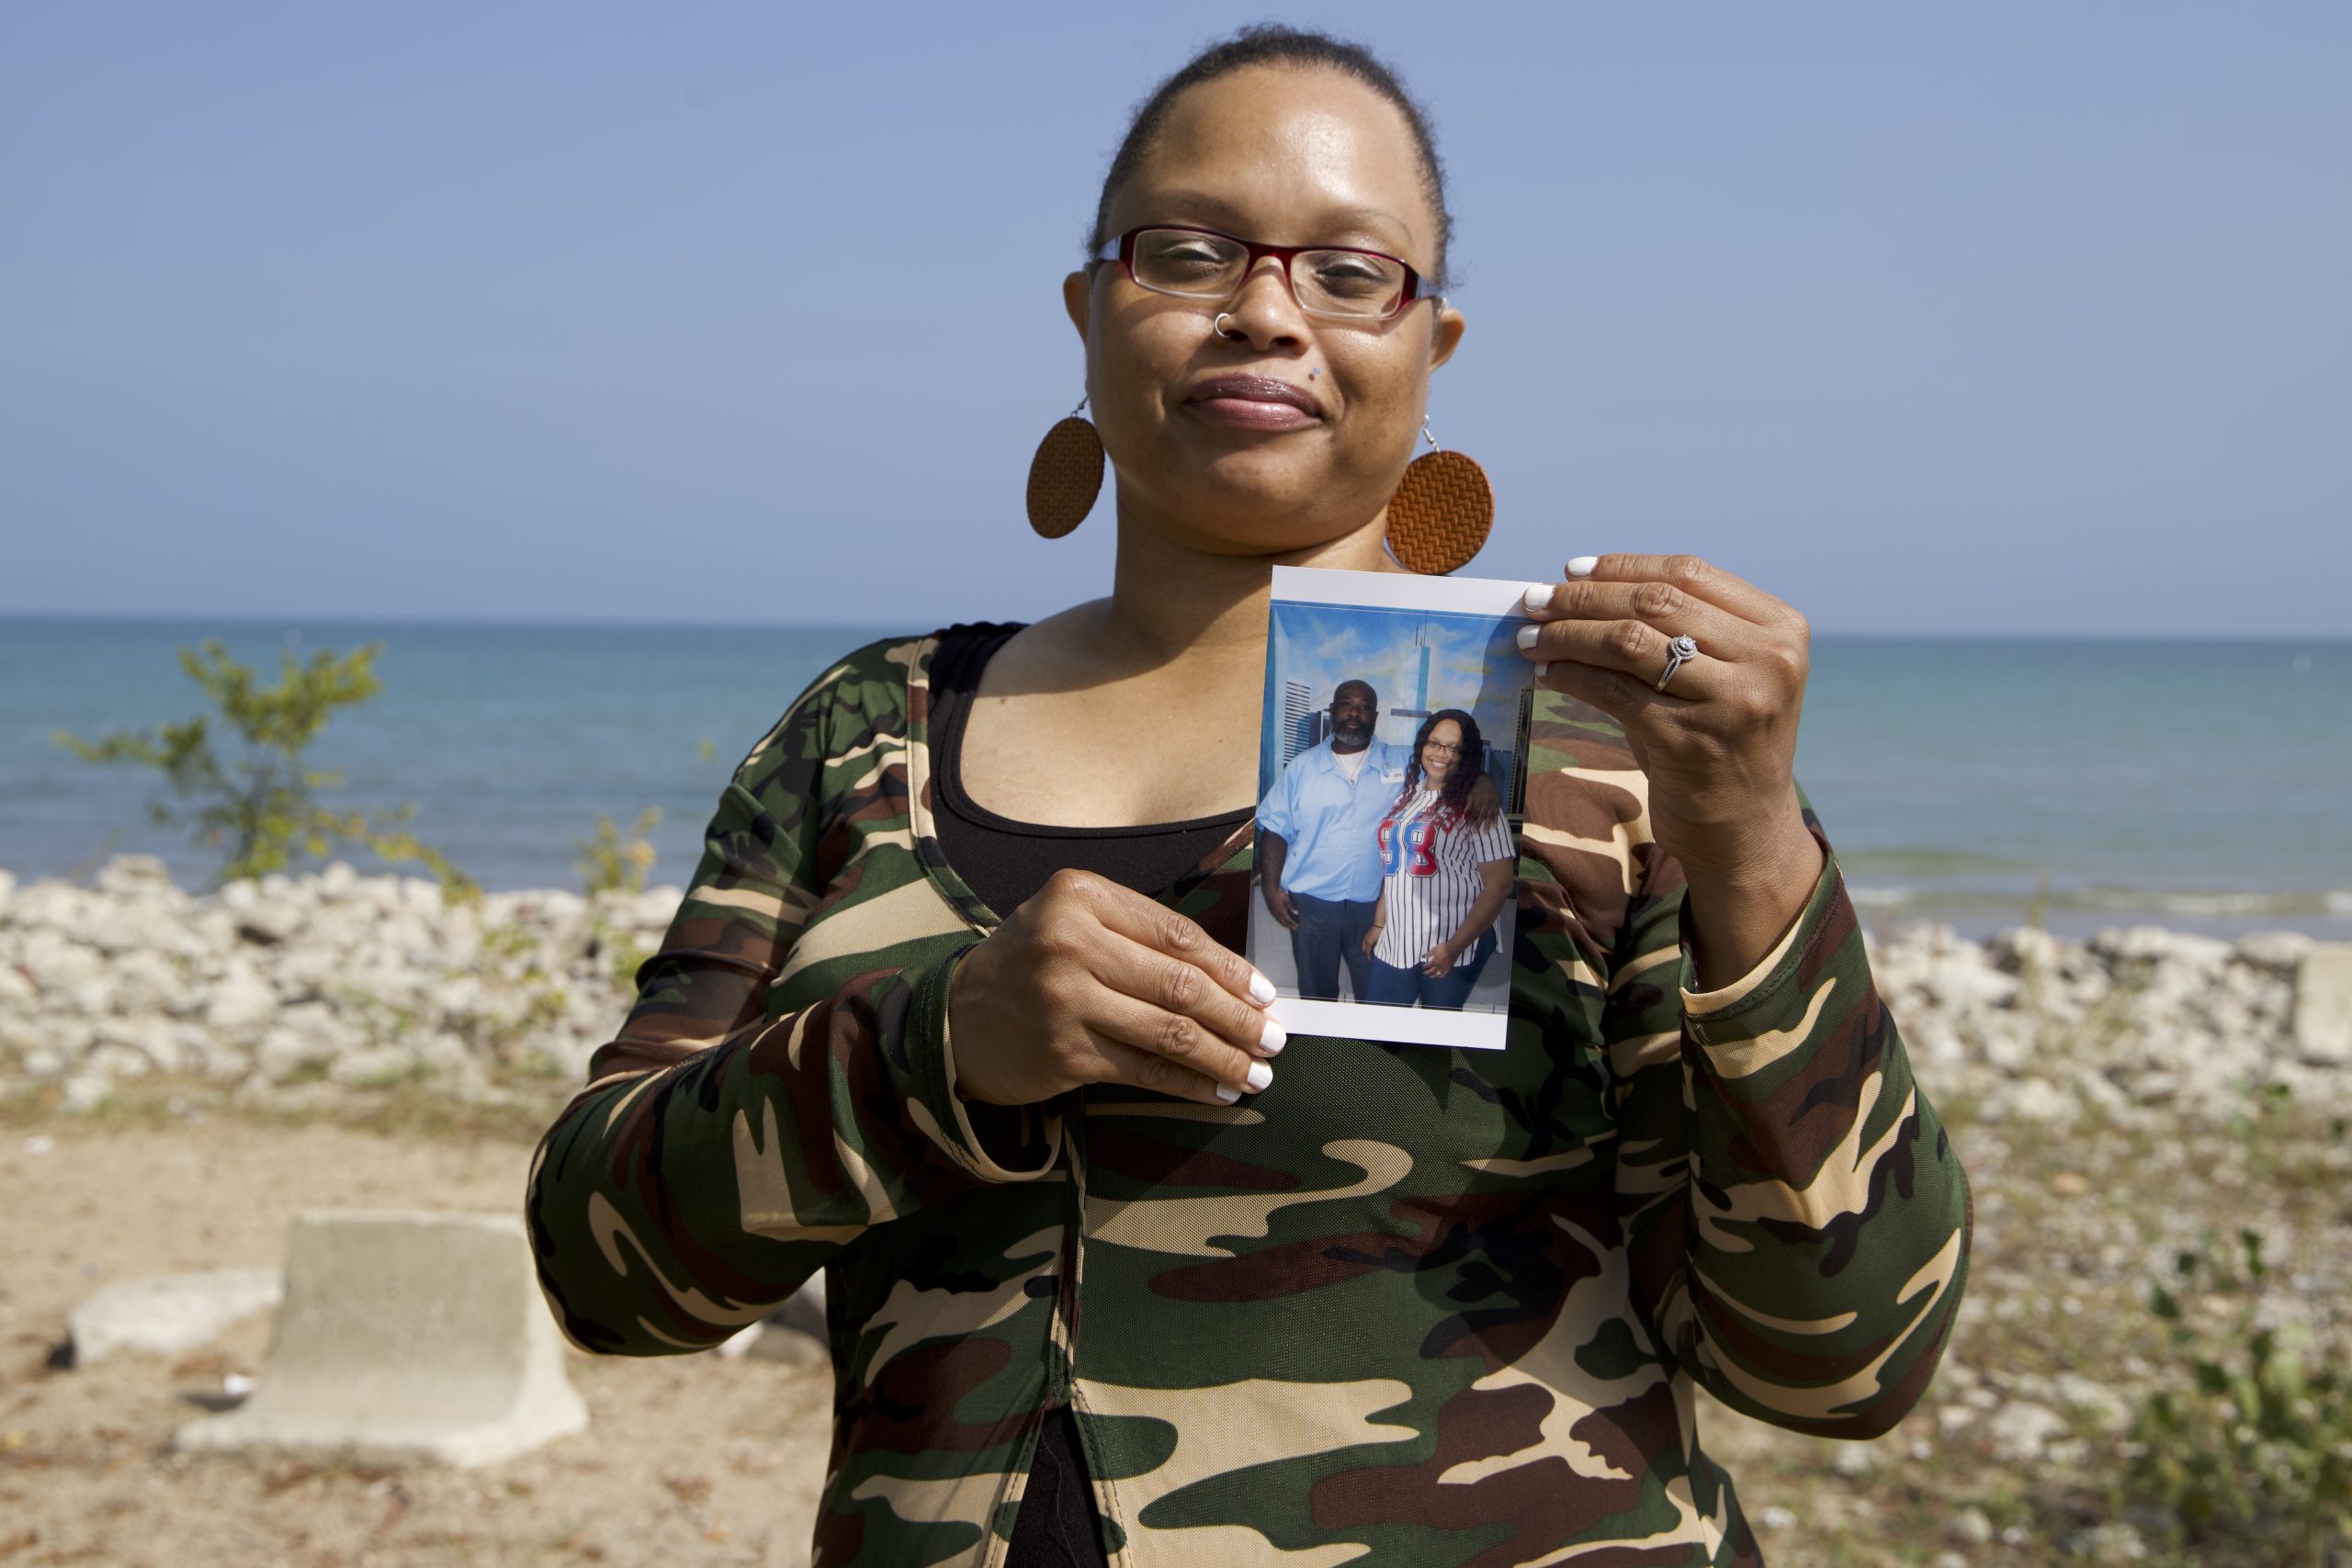 Tillie Lloyd holds a picture of herself and her fiance, Billy Johnson, who is deaf and working to get his GED while in prison. Lloyd says Johnson is being denied services. (Credit: Casey Toner/Illinois Answers Project)